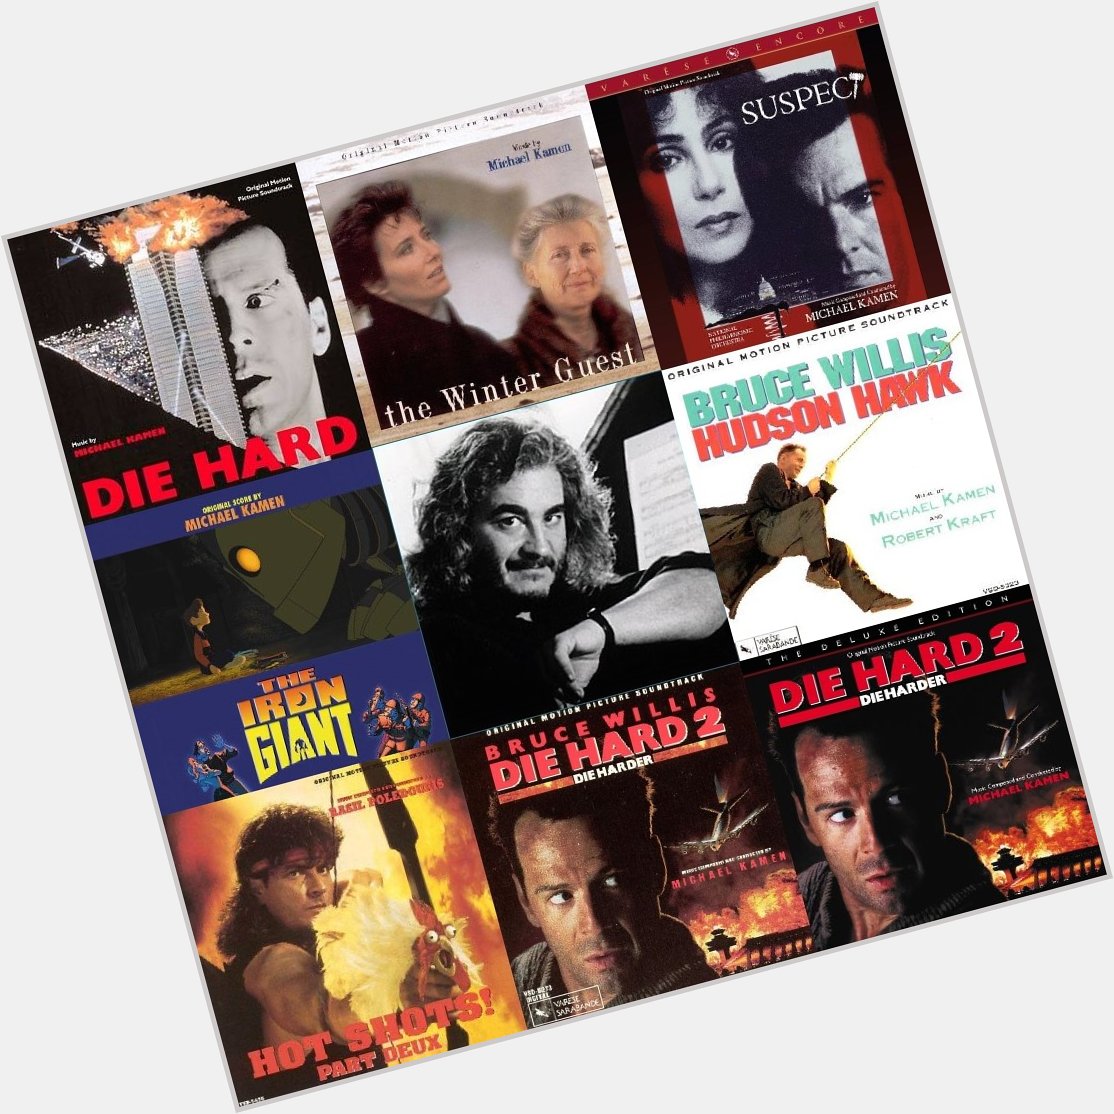 Happy Birthday to the beloved and dearly missed Michael Kamen What will you be spinning today in his honor? 